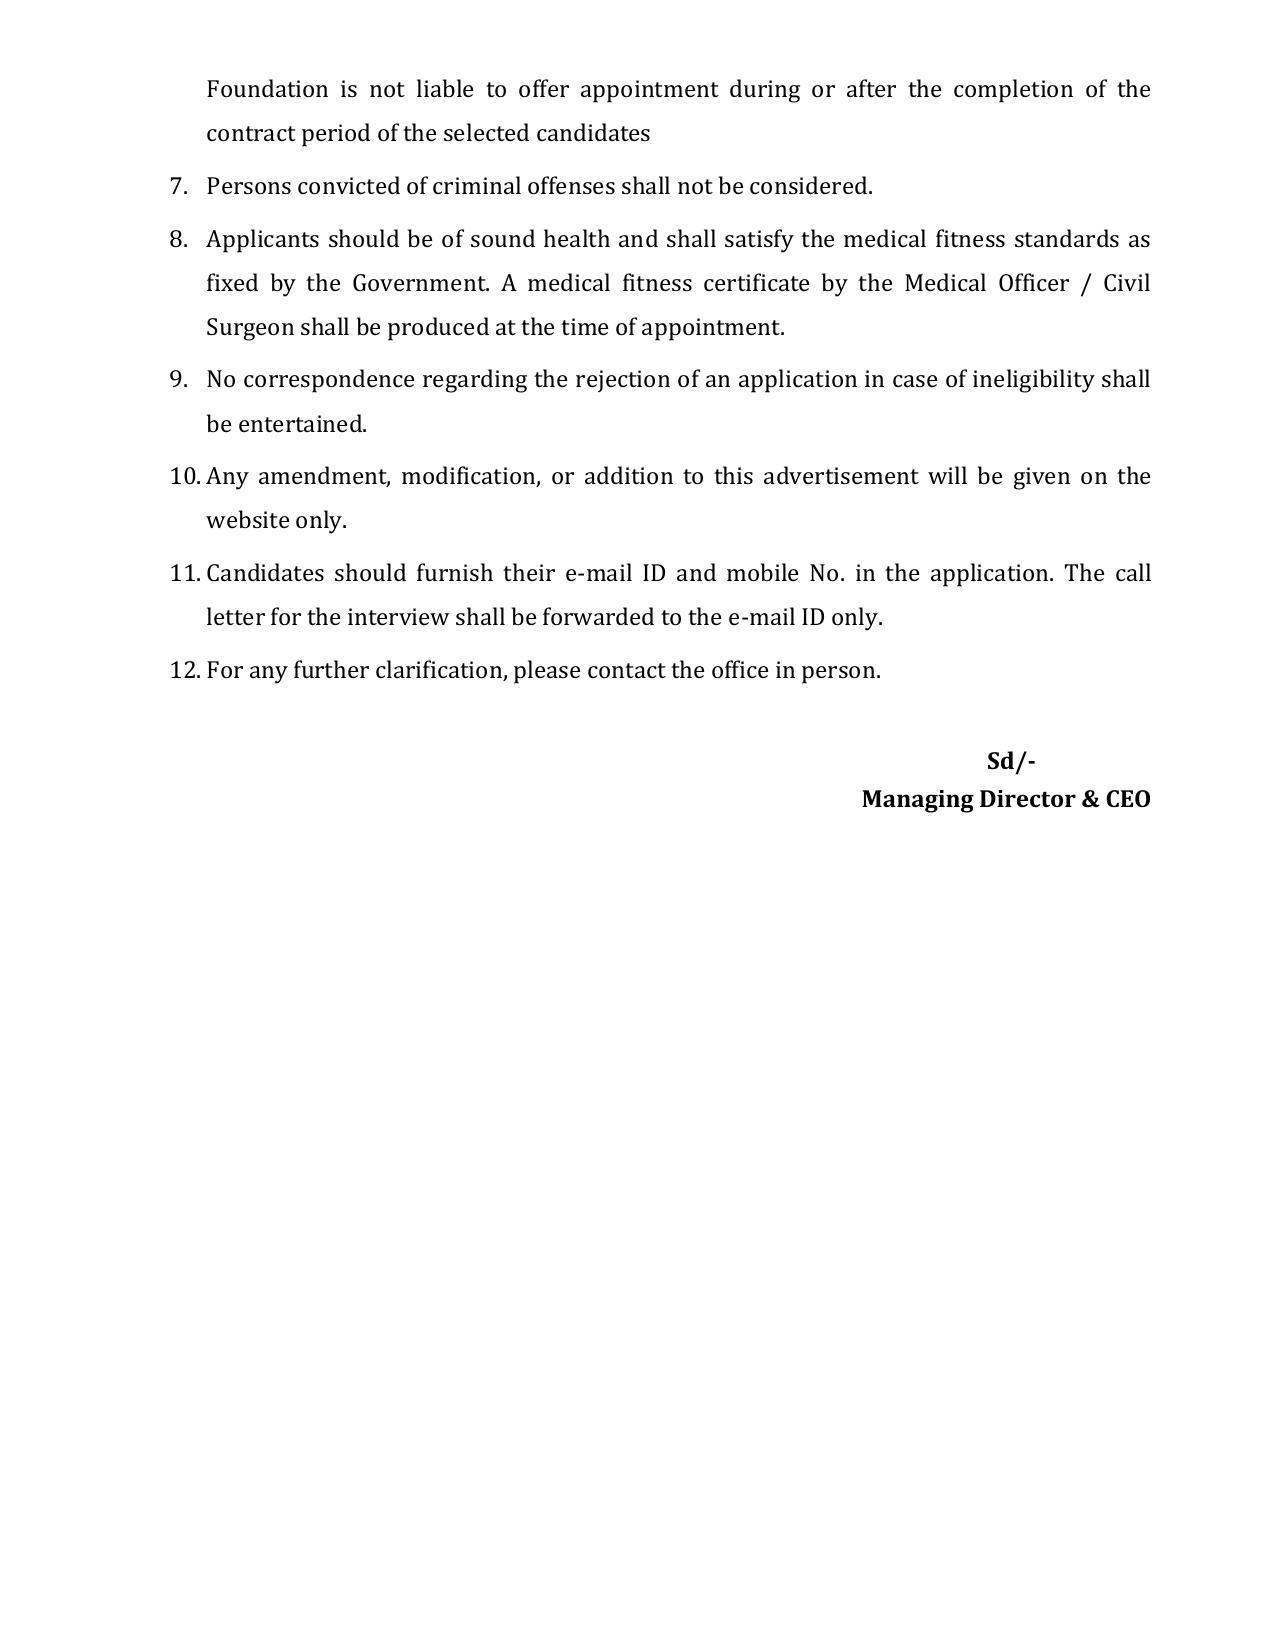 Ministry of Youth Affairs & Sports Invites Application for 13 Senior Trainer, Assistant Trainer Recruitment 2022 - Page 5